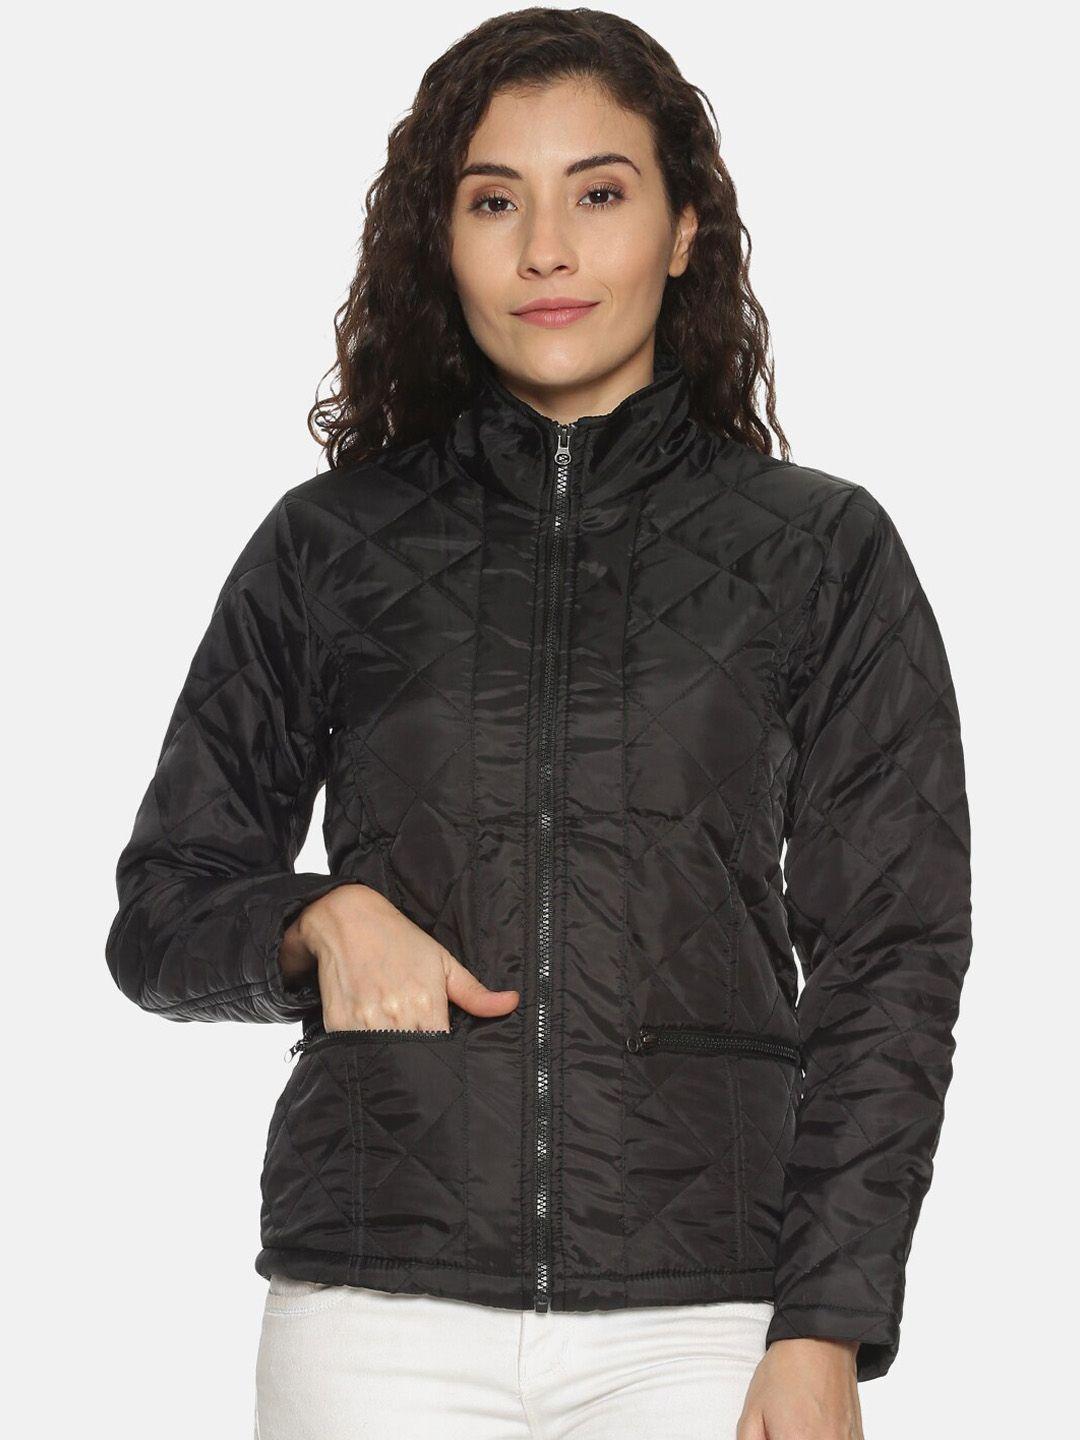 campus sutra women black printed windcheater open front jacket